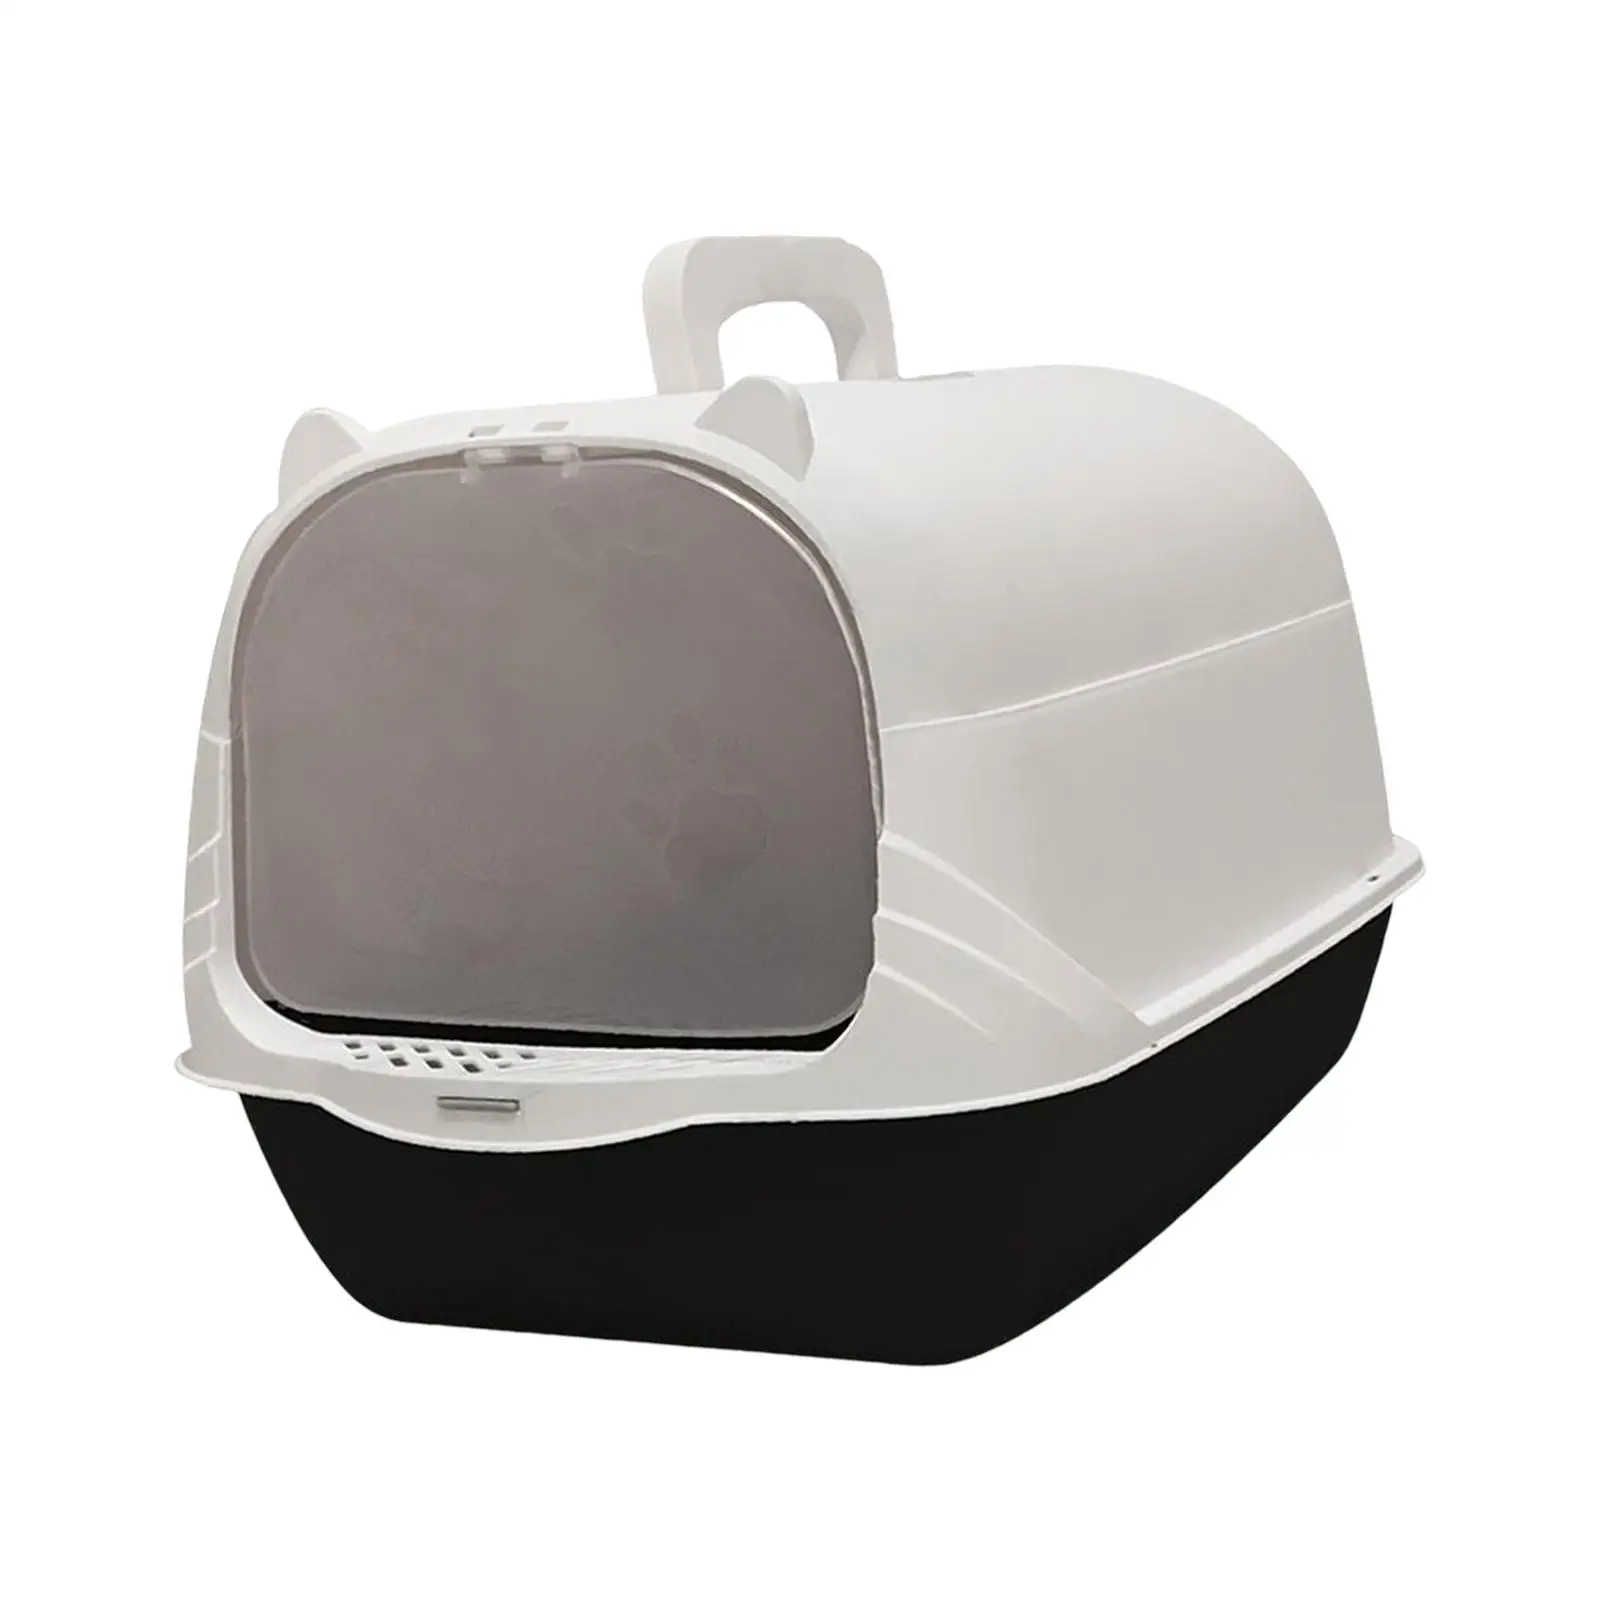 Cat Litter Box with Lid, Prevent Smell Large Cat Litter Box Handle Easy to Clean